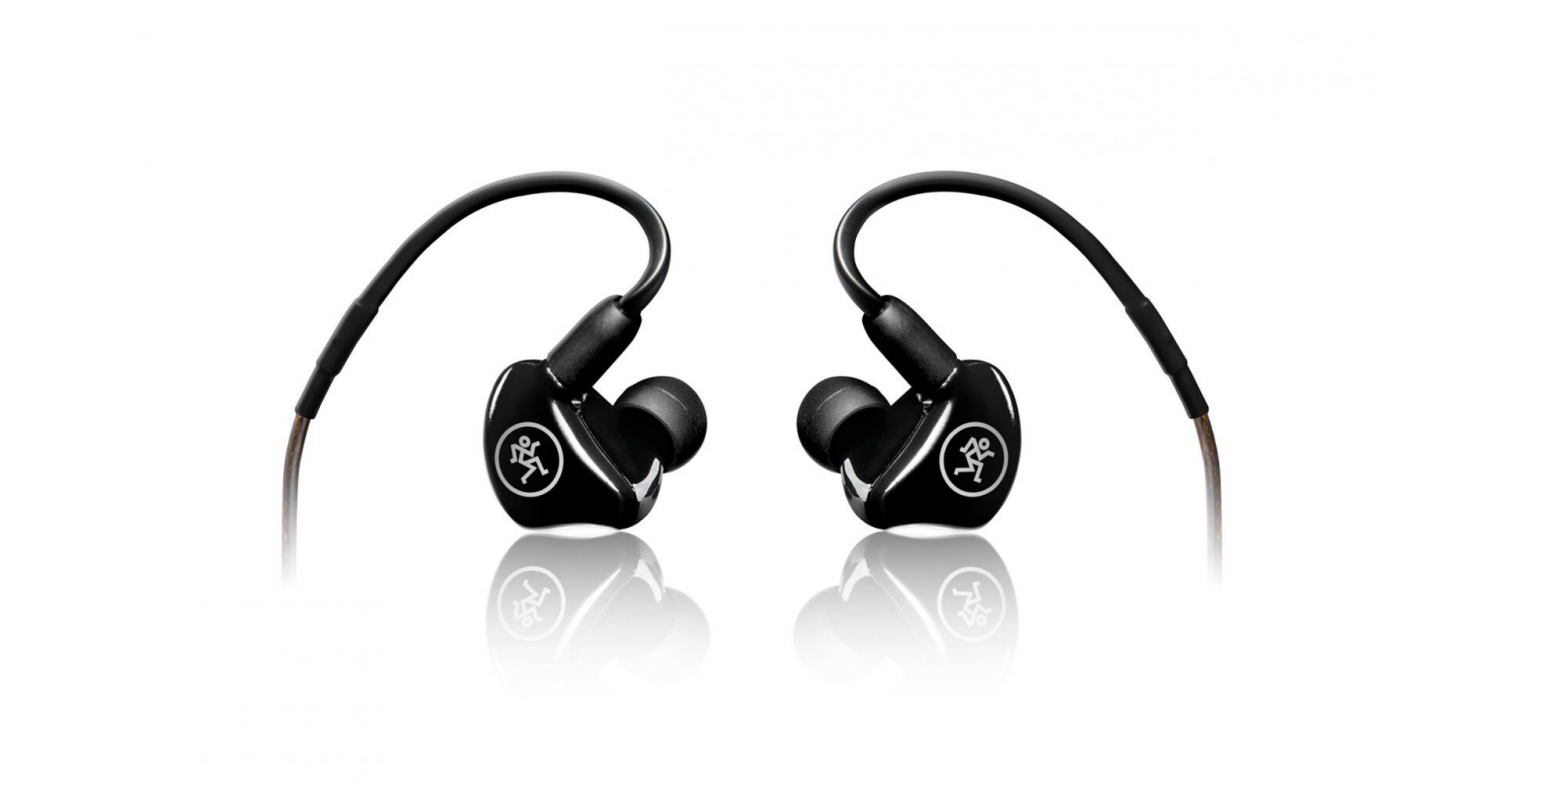 Mer information om "Mackie Expands MP In-Ear Monitor Series and Adds Bluetooth"